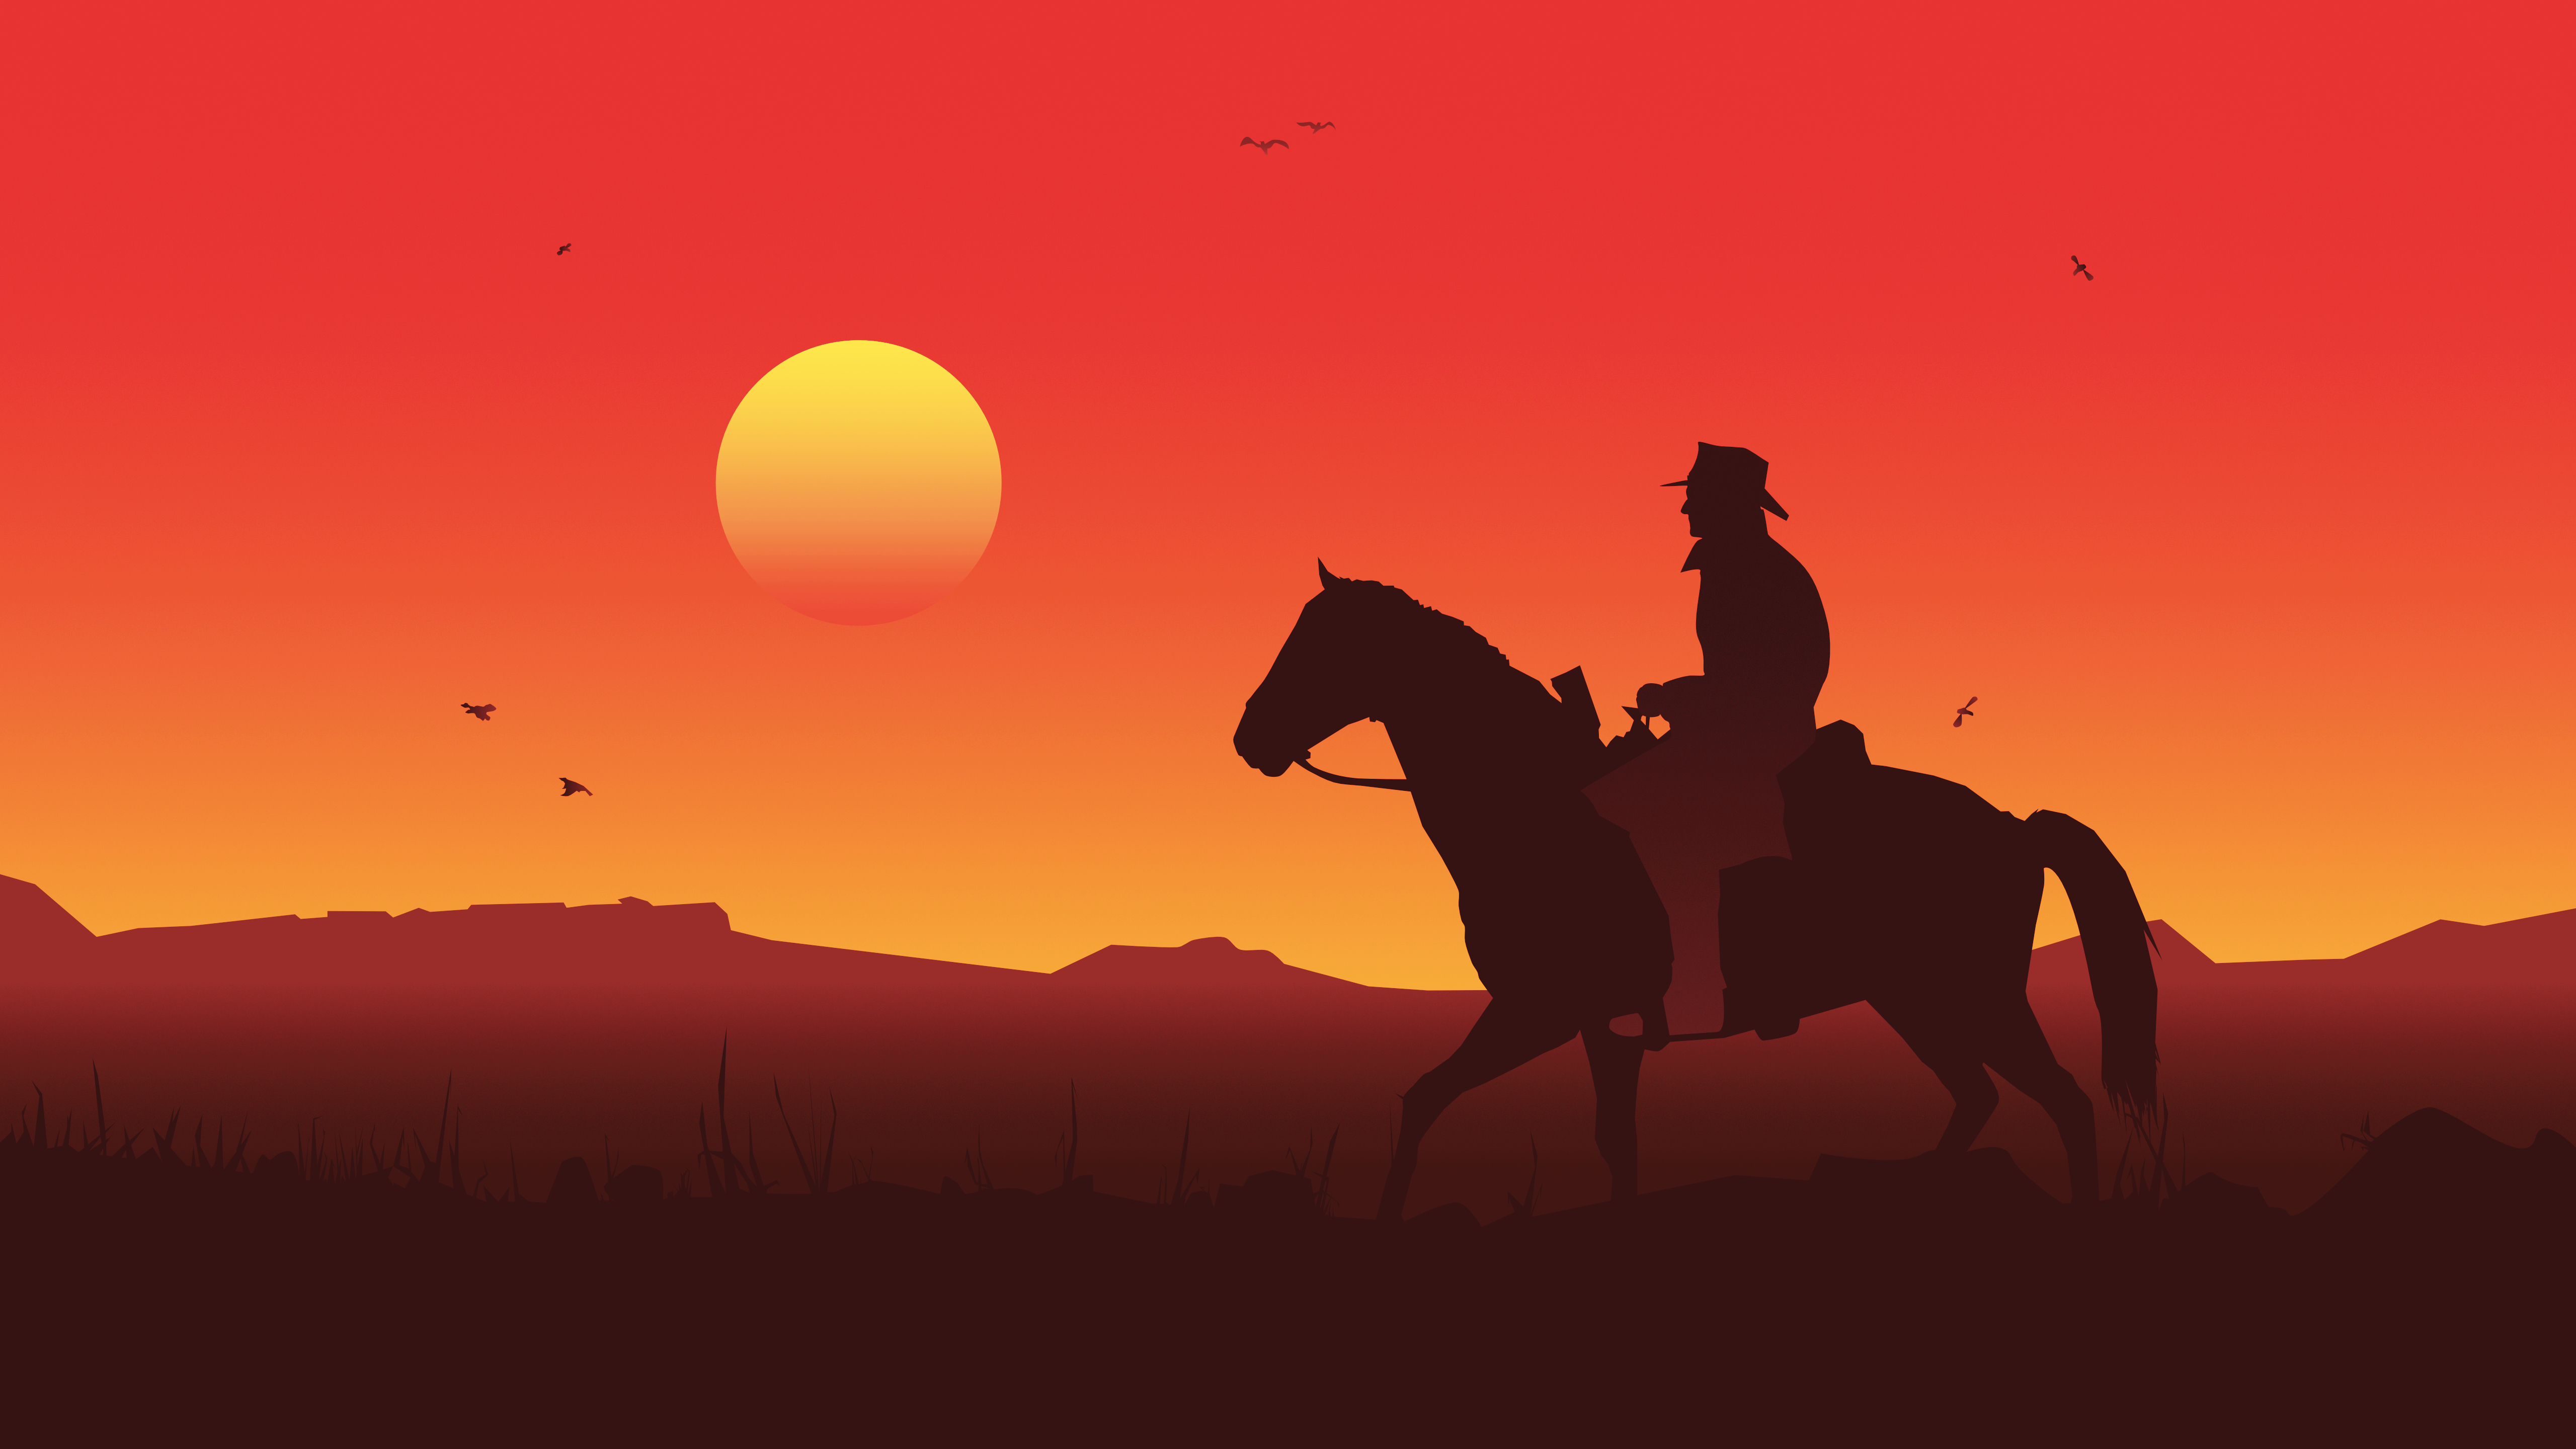 Red Dead Redemption 2 Wallpaper Hd Games 4k Wallpapers Images